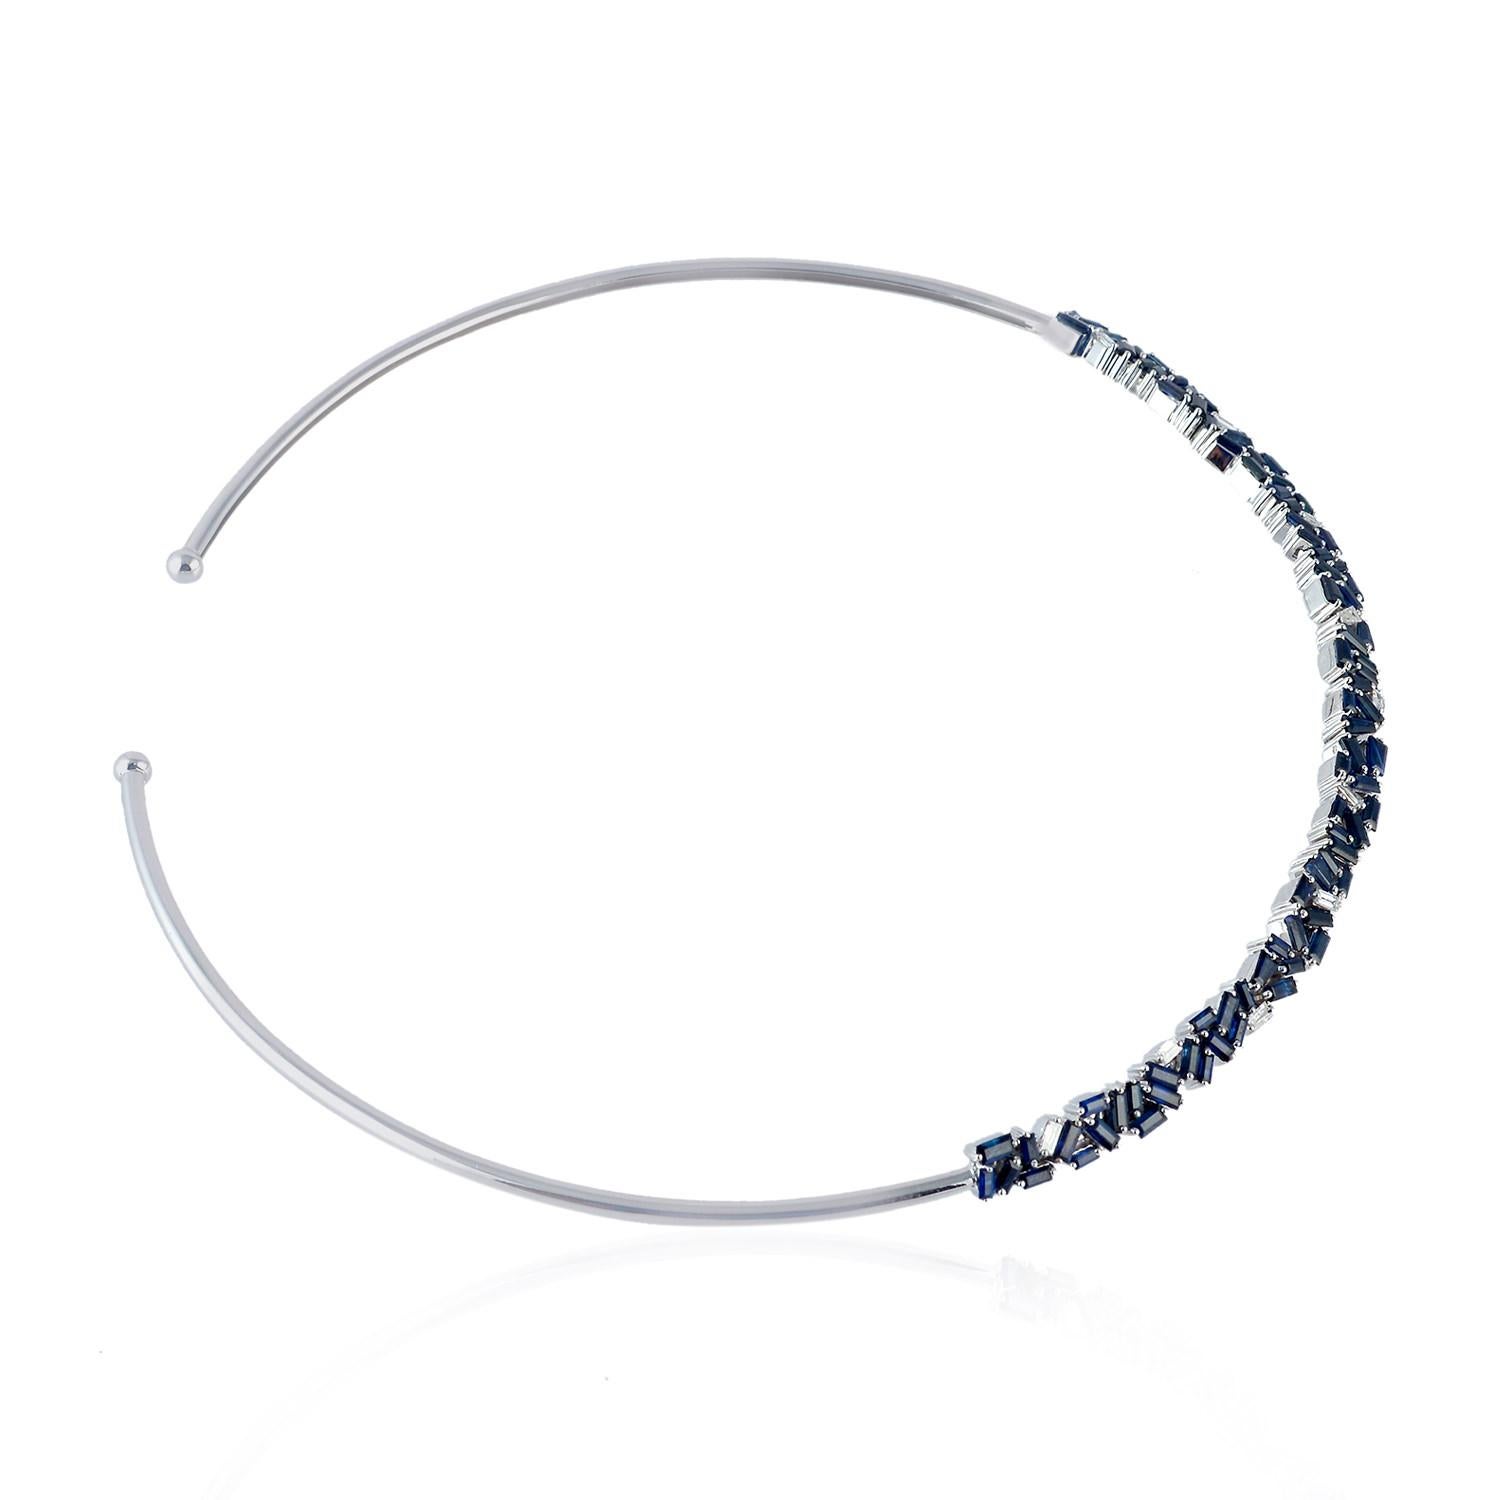 Mixed Cut 9.02 ct Baguette Shaped Blue Sapphire Choker Necklace Made In 18k White Gold For Sale